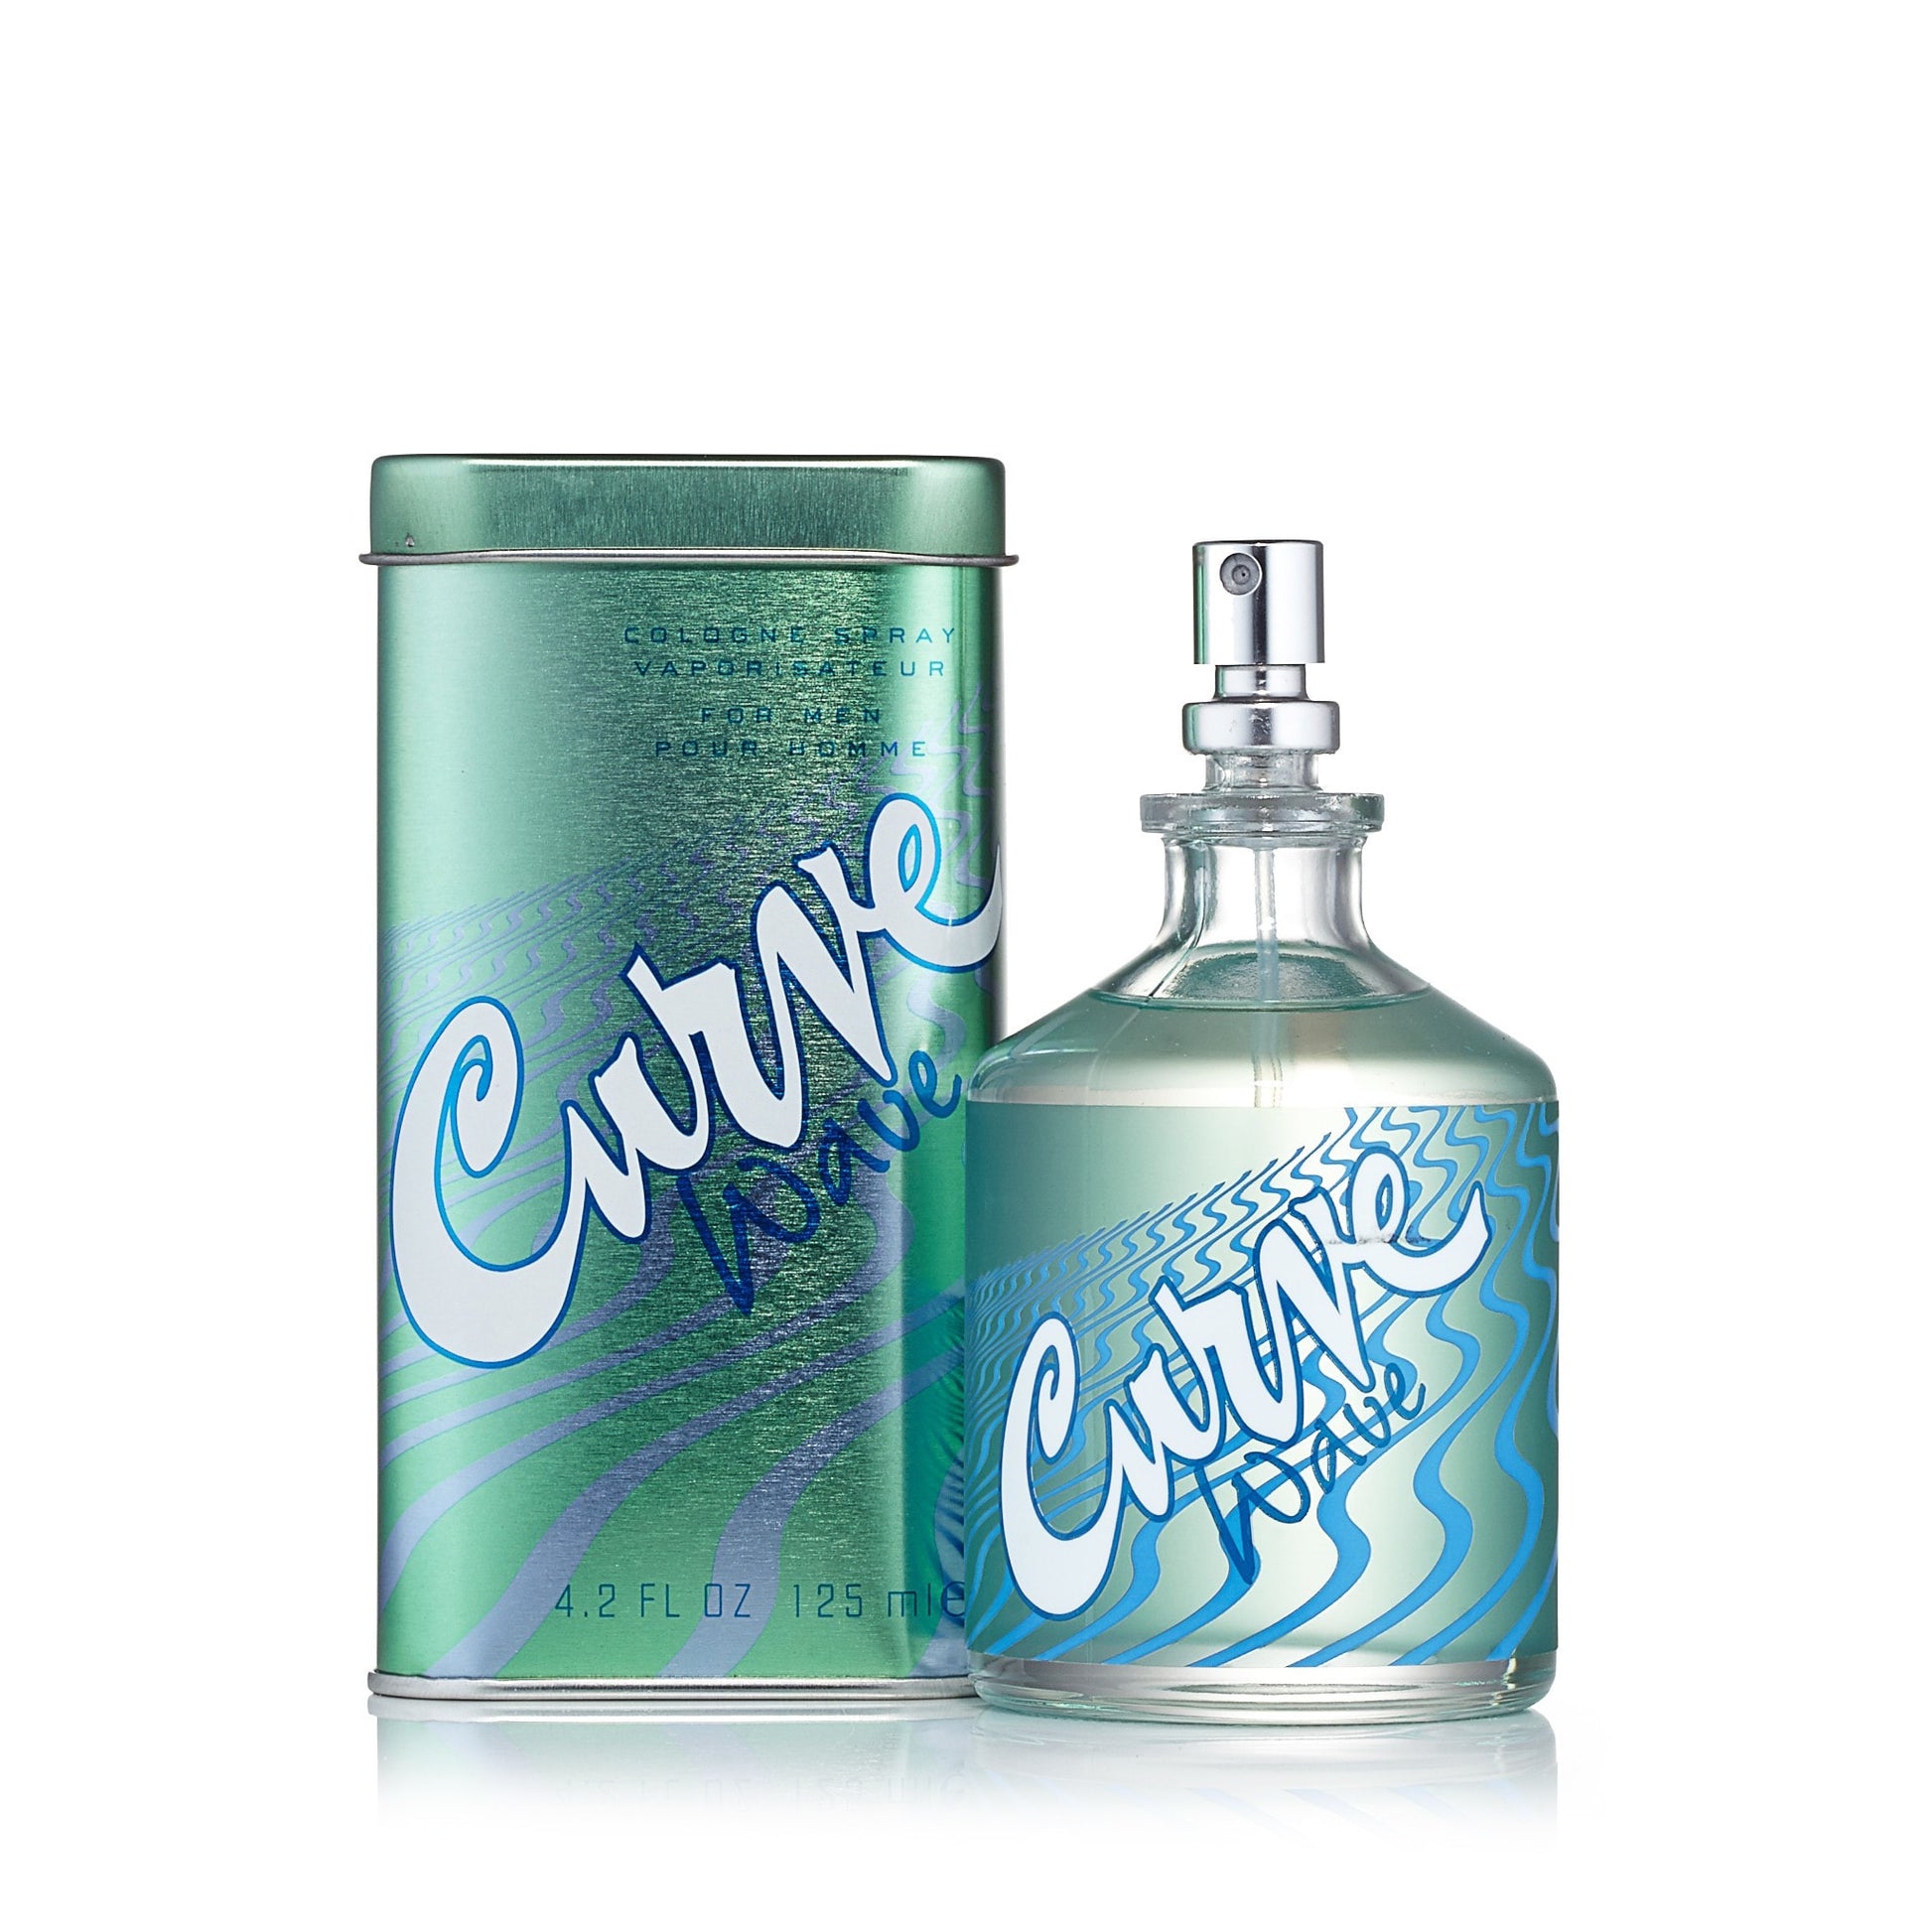 Curve Wave Cologne Spray for Men by Claiborne, Product image 2